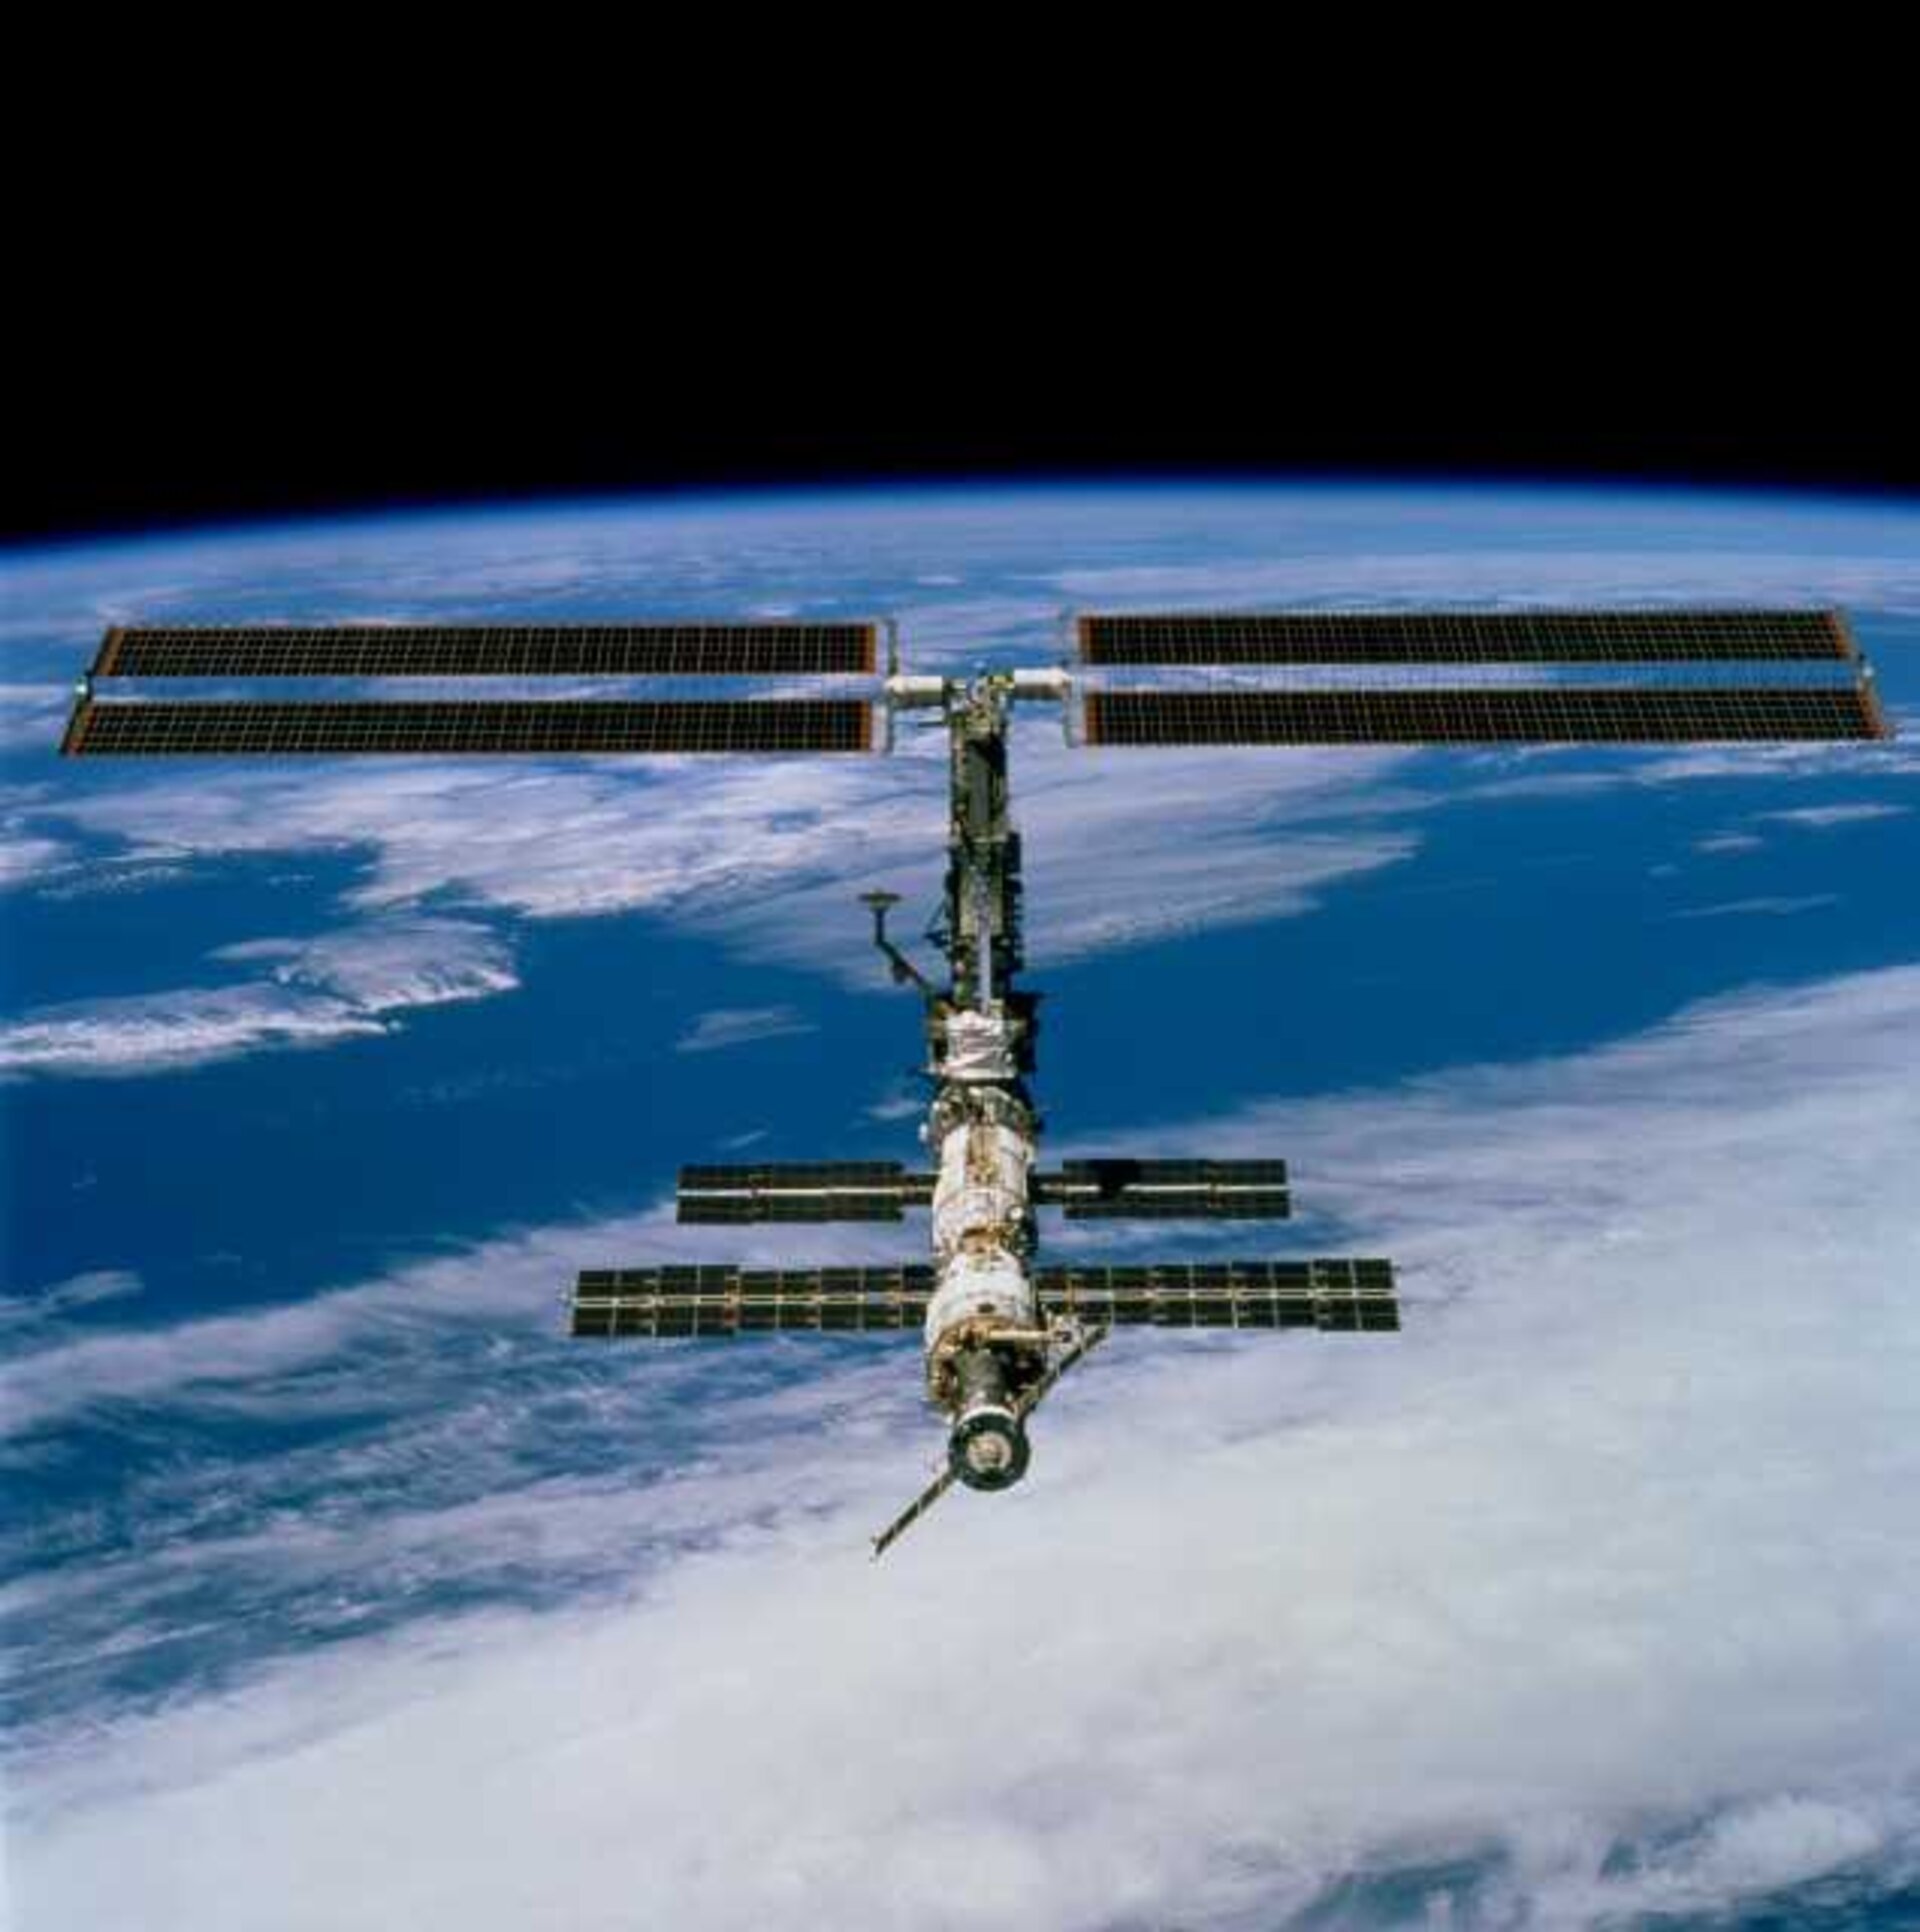 The International Space Station: open for commercial use